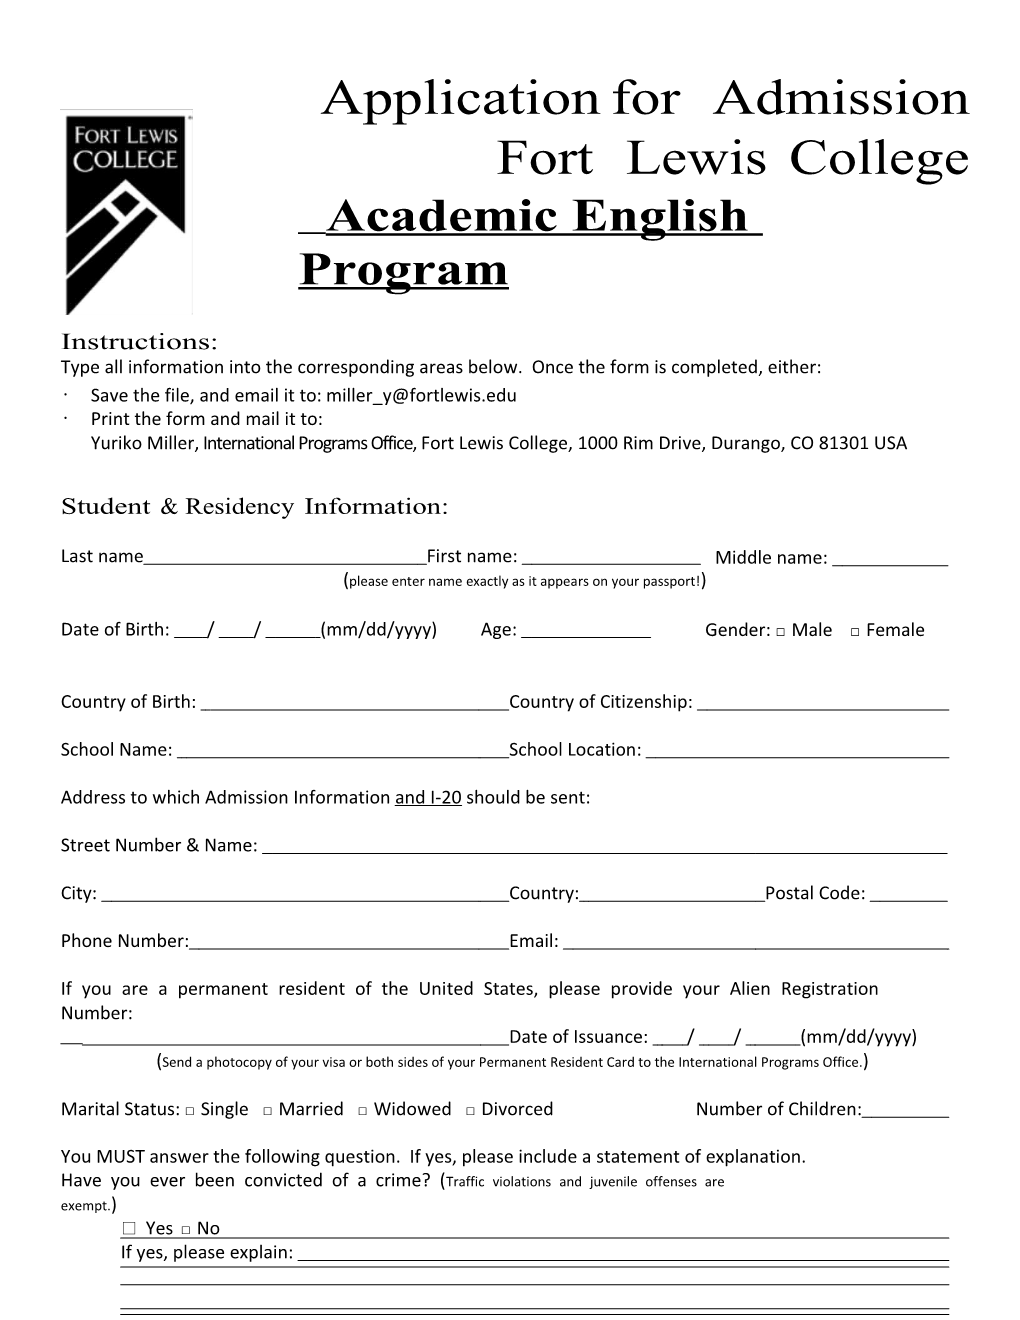 Application for Admission s1